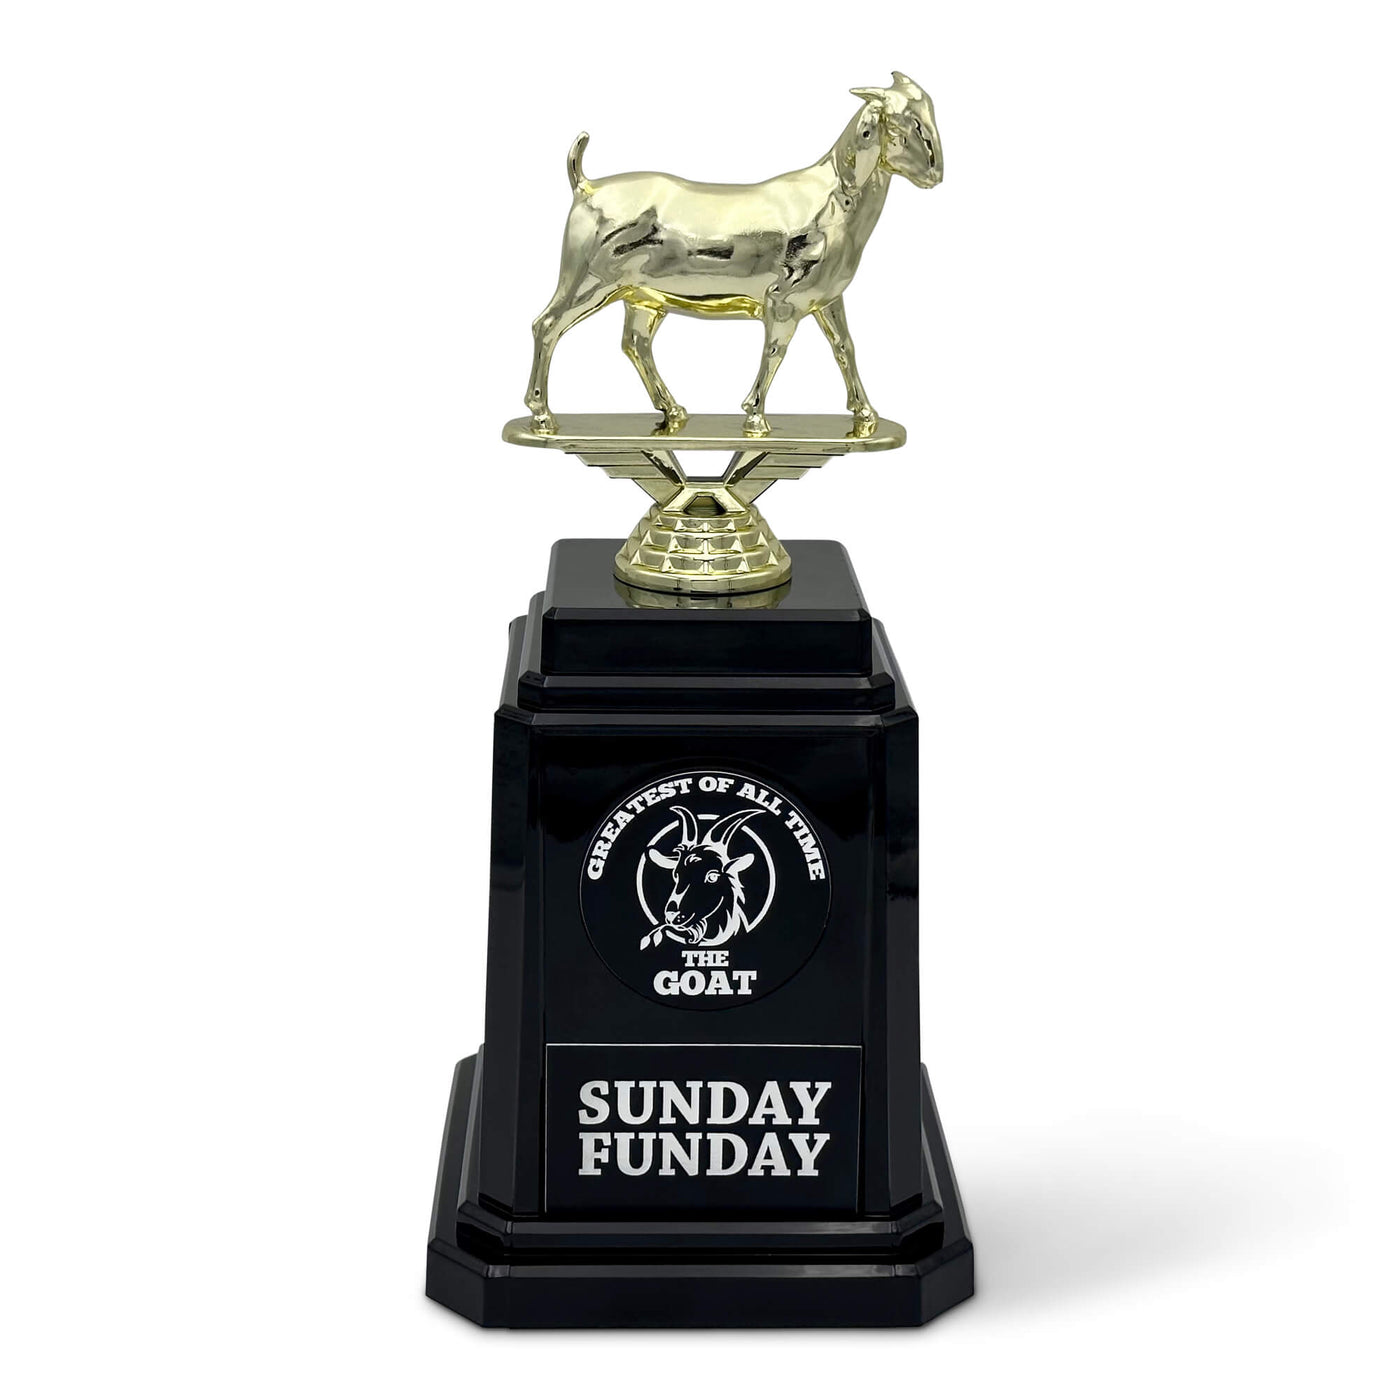 GOAT Trophy Greatest of All Time Award Trophy Hand Painted 